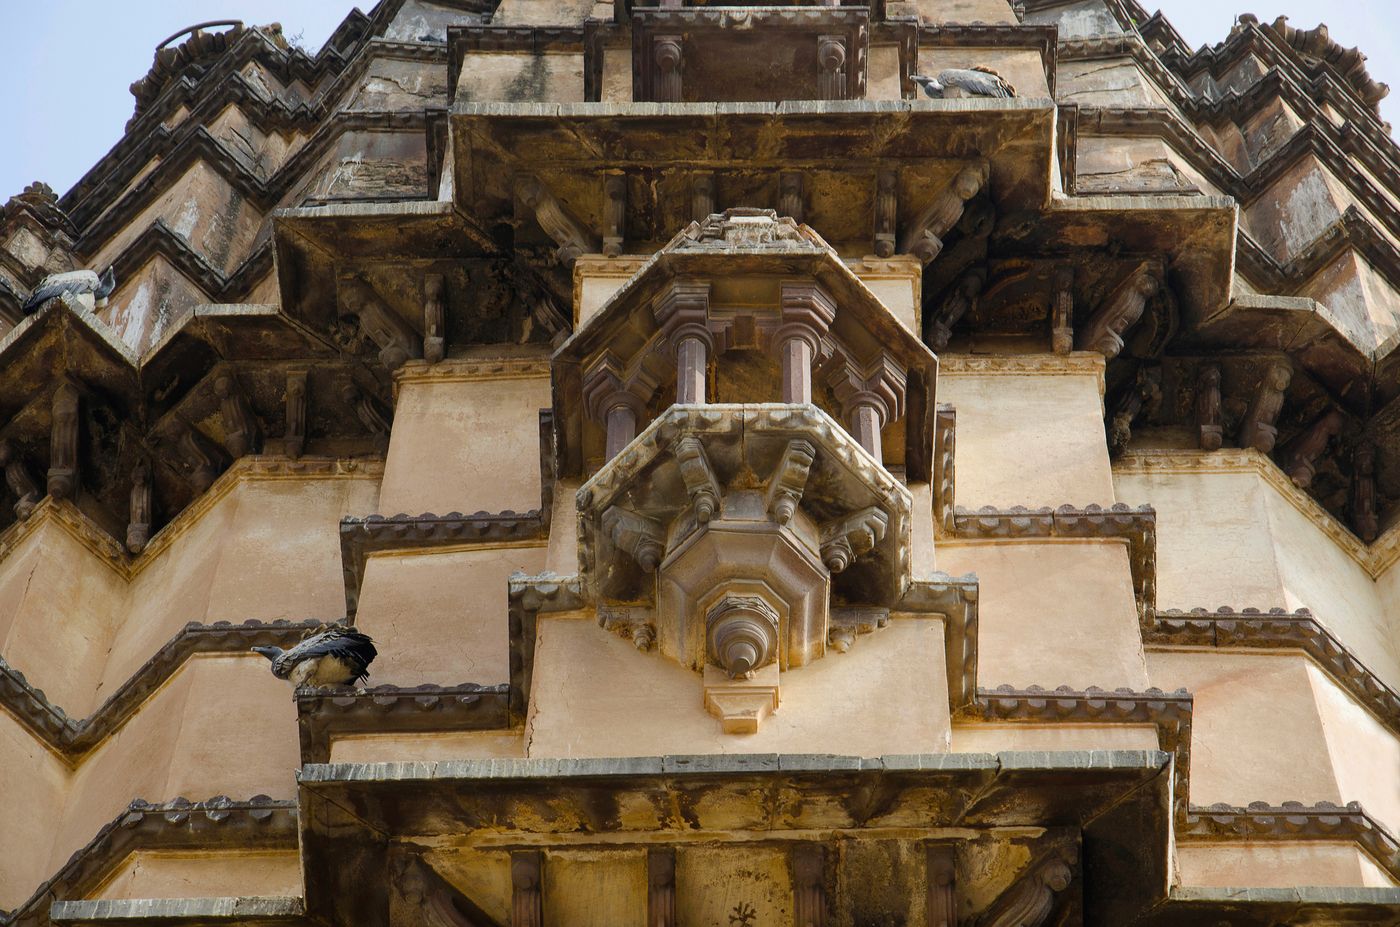 Chaturbhuj temple’s engraved exteriors. This temple is dedicated to Lord Vishnu, Orchha 